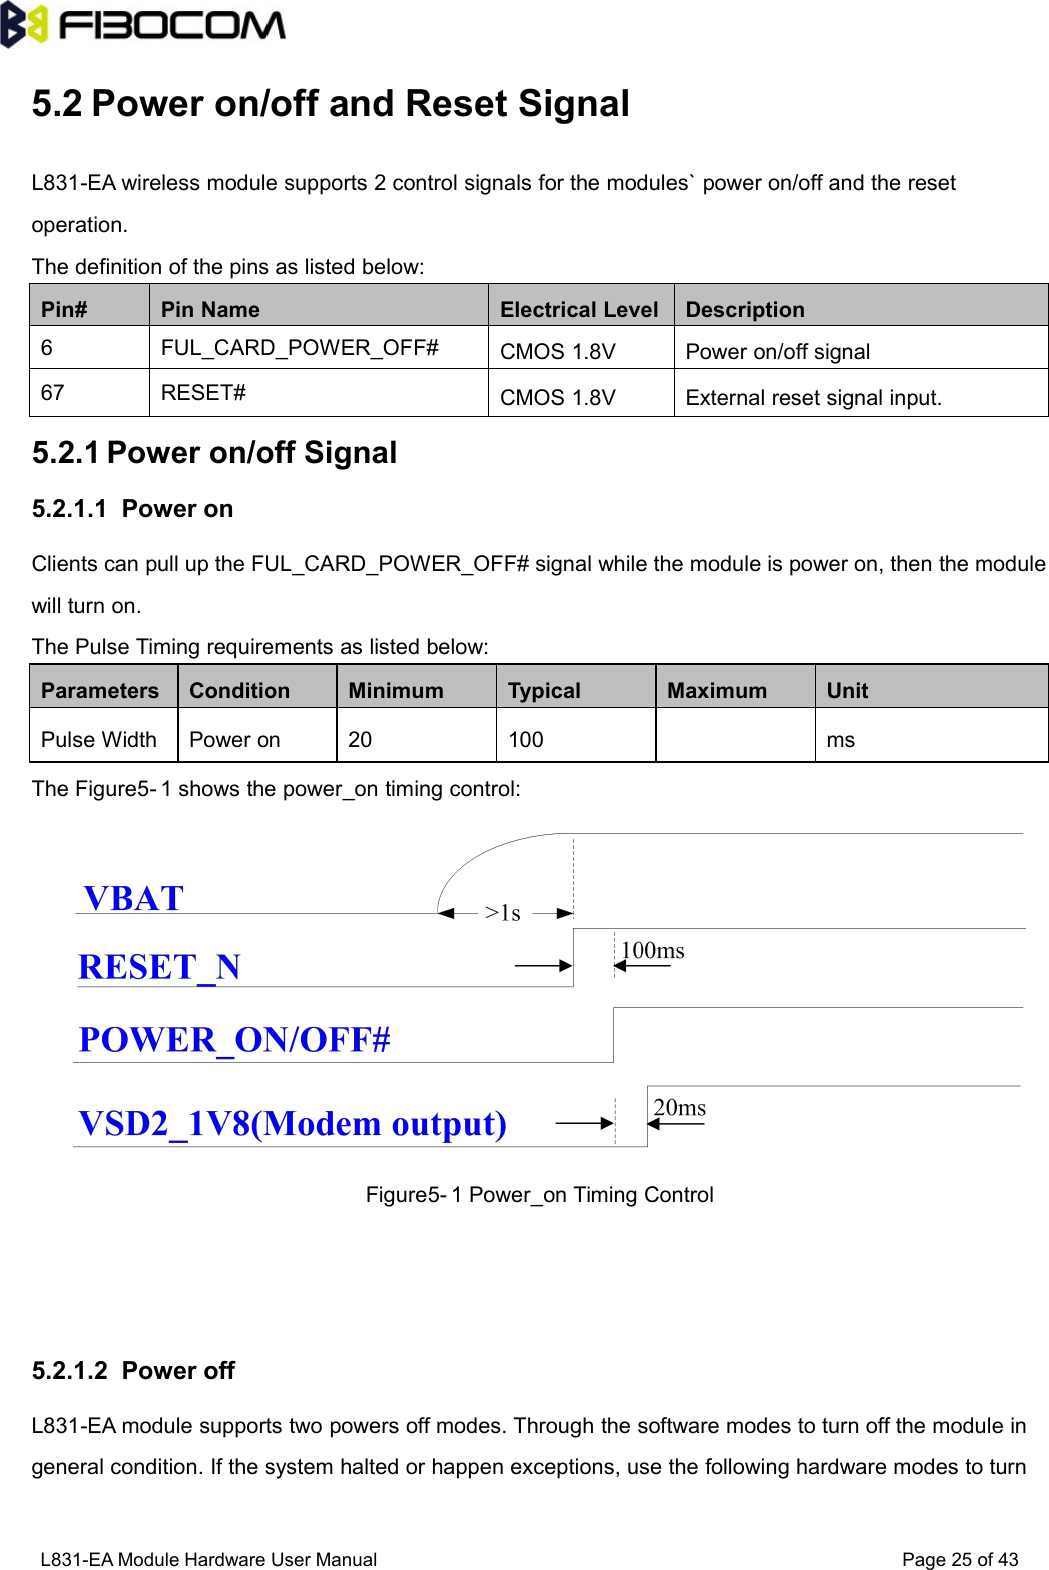 L831-EA Module Hardware User Manual Page25of435.2 Power on/off and Reset SignalL831-EA wireless module supports 2 control signals for the modules` power on/off and the resetoperation.The definition of the pins as listed below:Pin#Pin NameElectrical LevelDescription6FUL_CARD_POWER_OFF#CMOS 1.8VPower on/off signal67RESET#CMOS 1.8VExternal reset signal input.5.2.1 Power on/off Signal5.2.1.1 Power onClients can pull up the FUL_CARD_POWER_OFF# signal while the module is power on, then the modulewill turn on.The Pulse Timing requirements as listed below:ParametersConditionMinimumTypicalMaximumUnitPulse WidthPower on20100msThe Figure5- 1 shows the power_on timing control:Figure5- 1 Power_on Timing Control5.2.1.2 Power offL831-EA module supports two powers off modes. Through the software modes to turn off the module ingeneral condition. If the system halted or happen exceptions, use the following hardware modes to turn